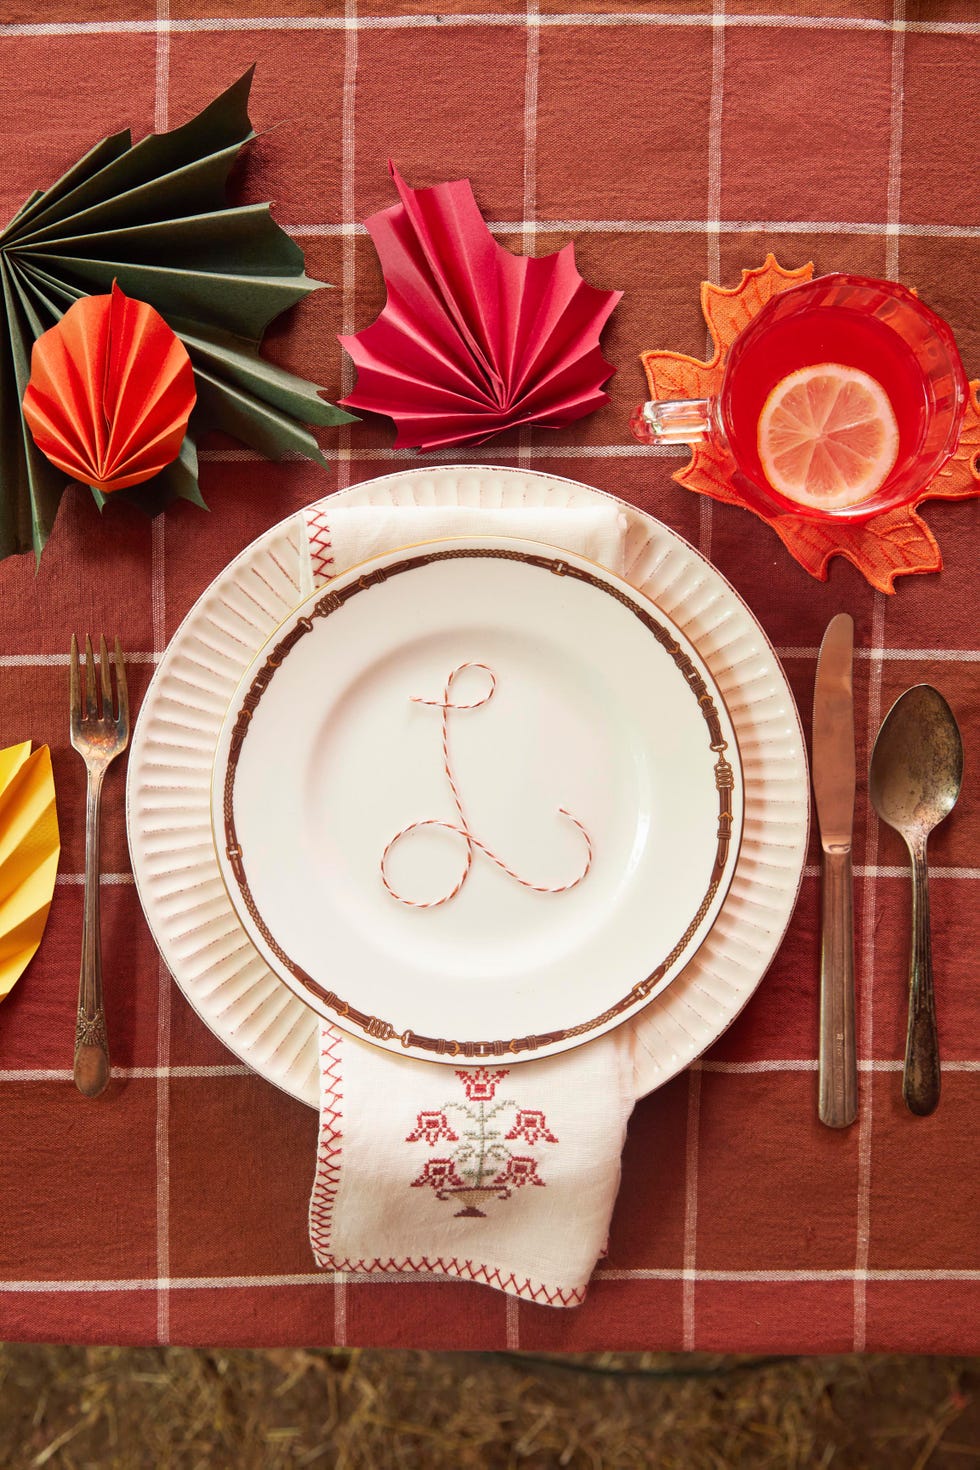 single letter “monograms” made with baker’s twine on dinner plates